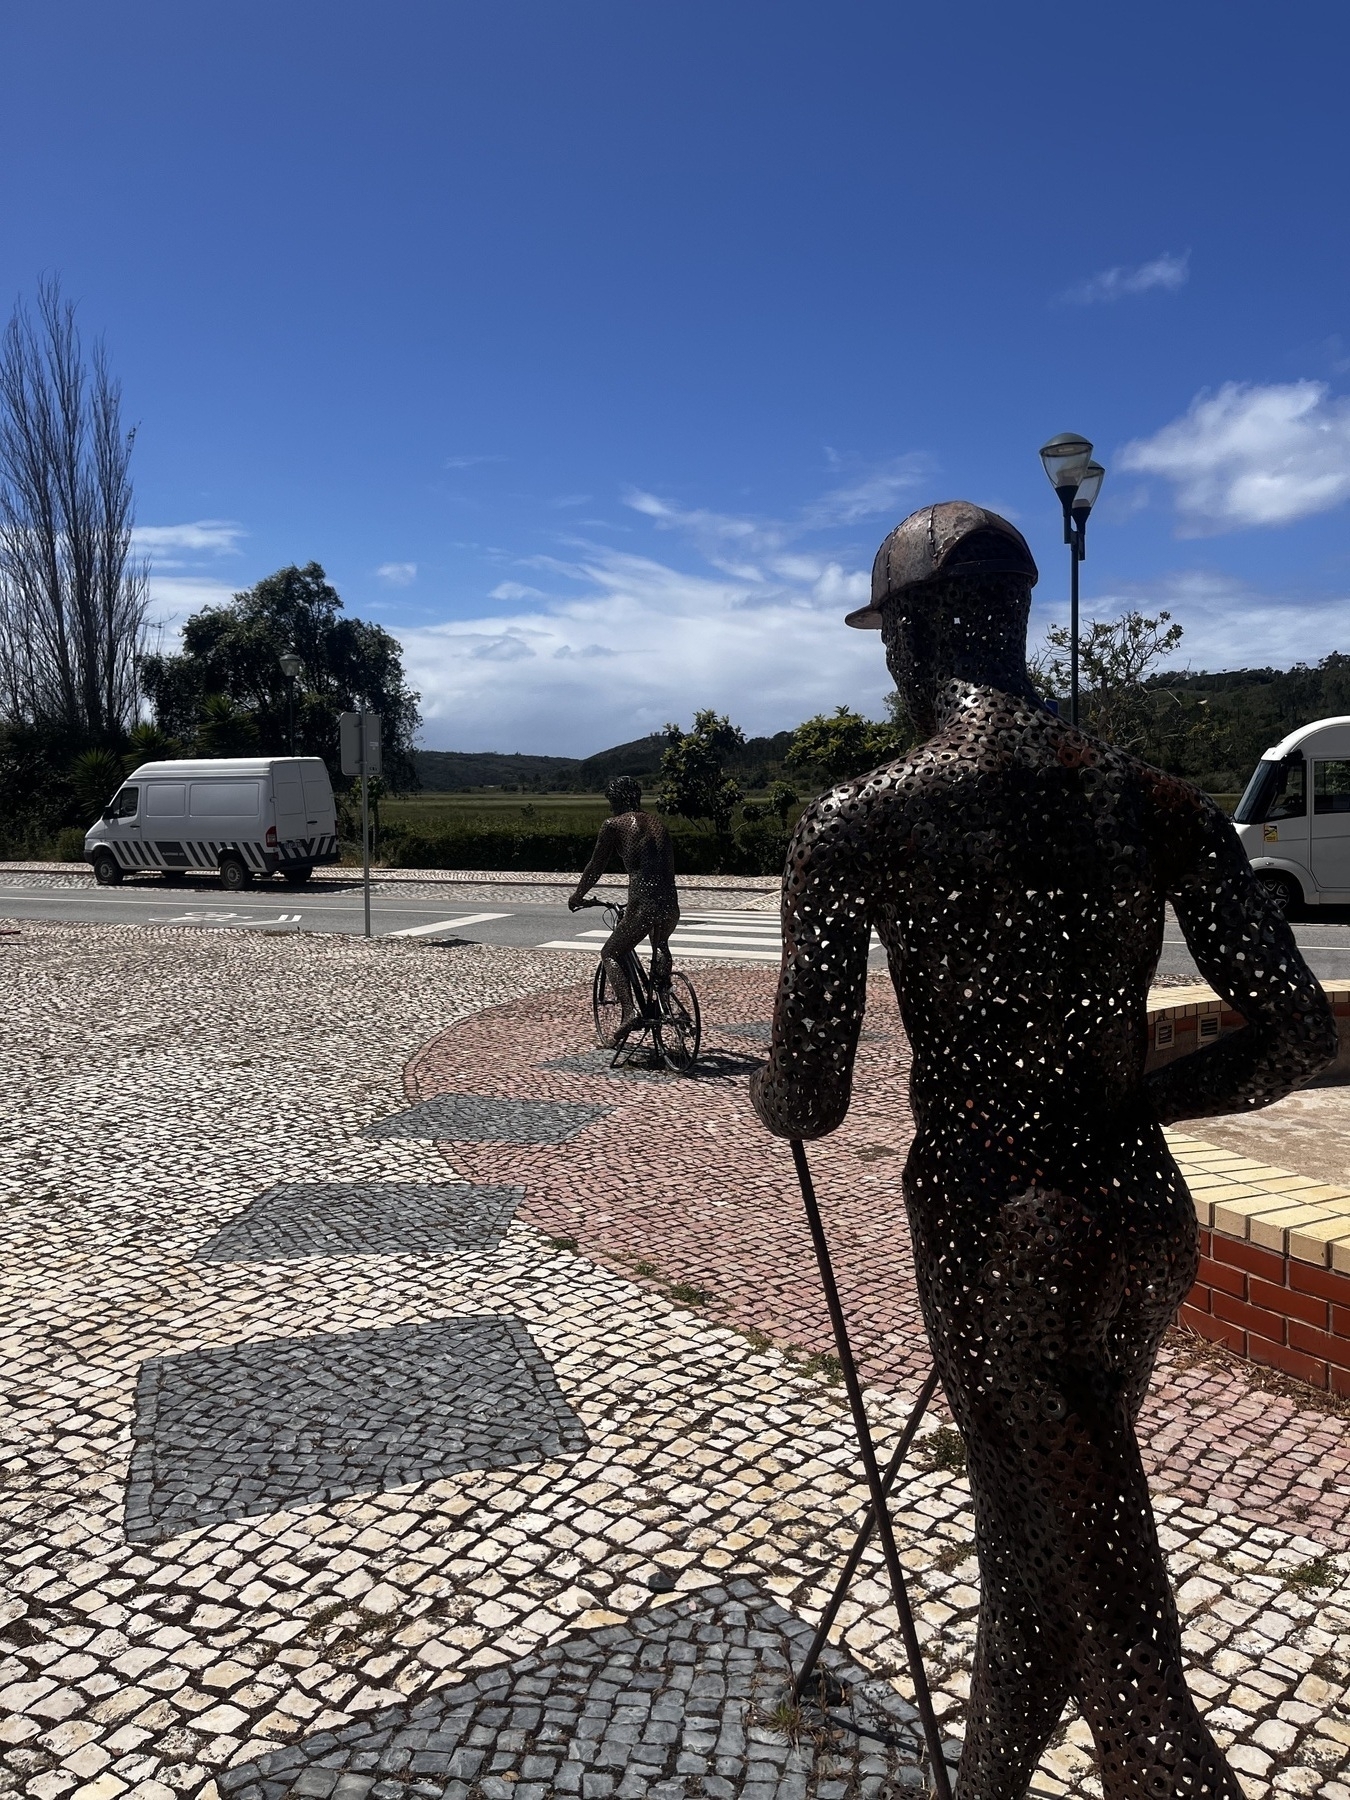 Metal statues of a person walking and cycling in a small square on the edge of a town.